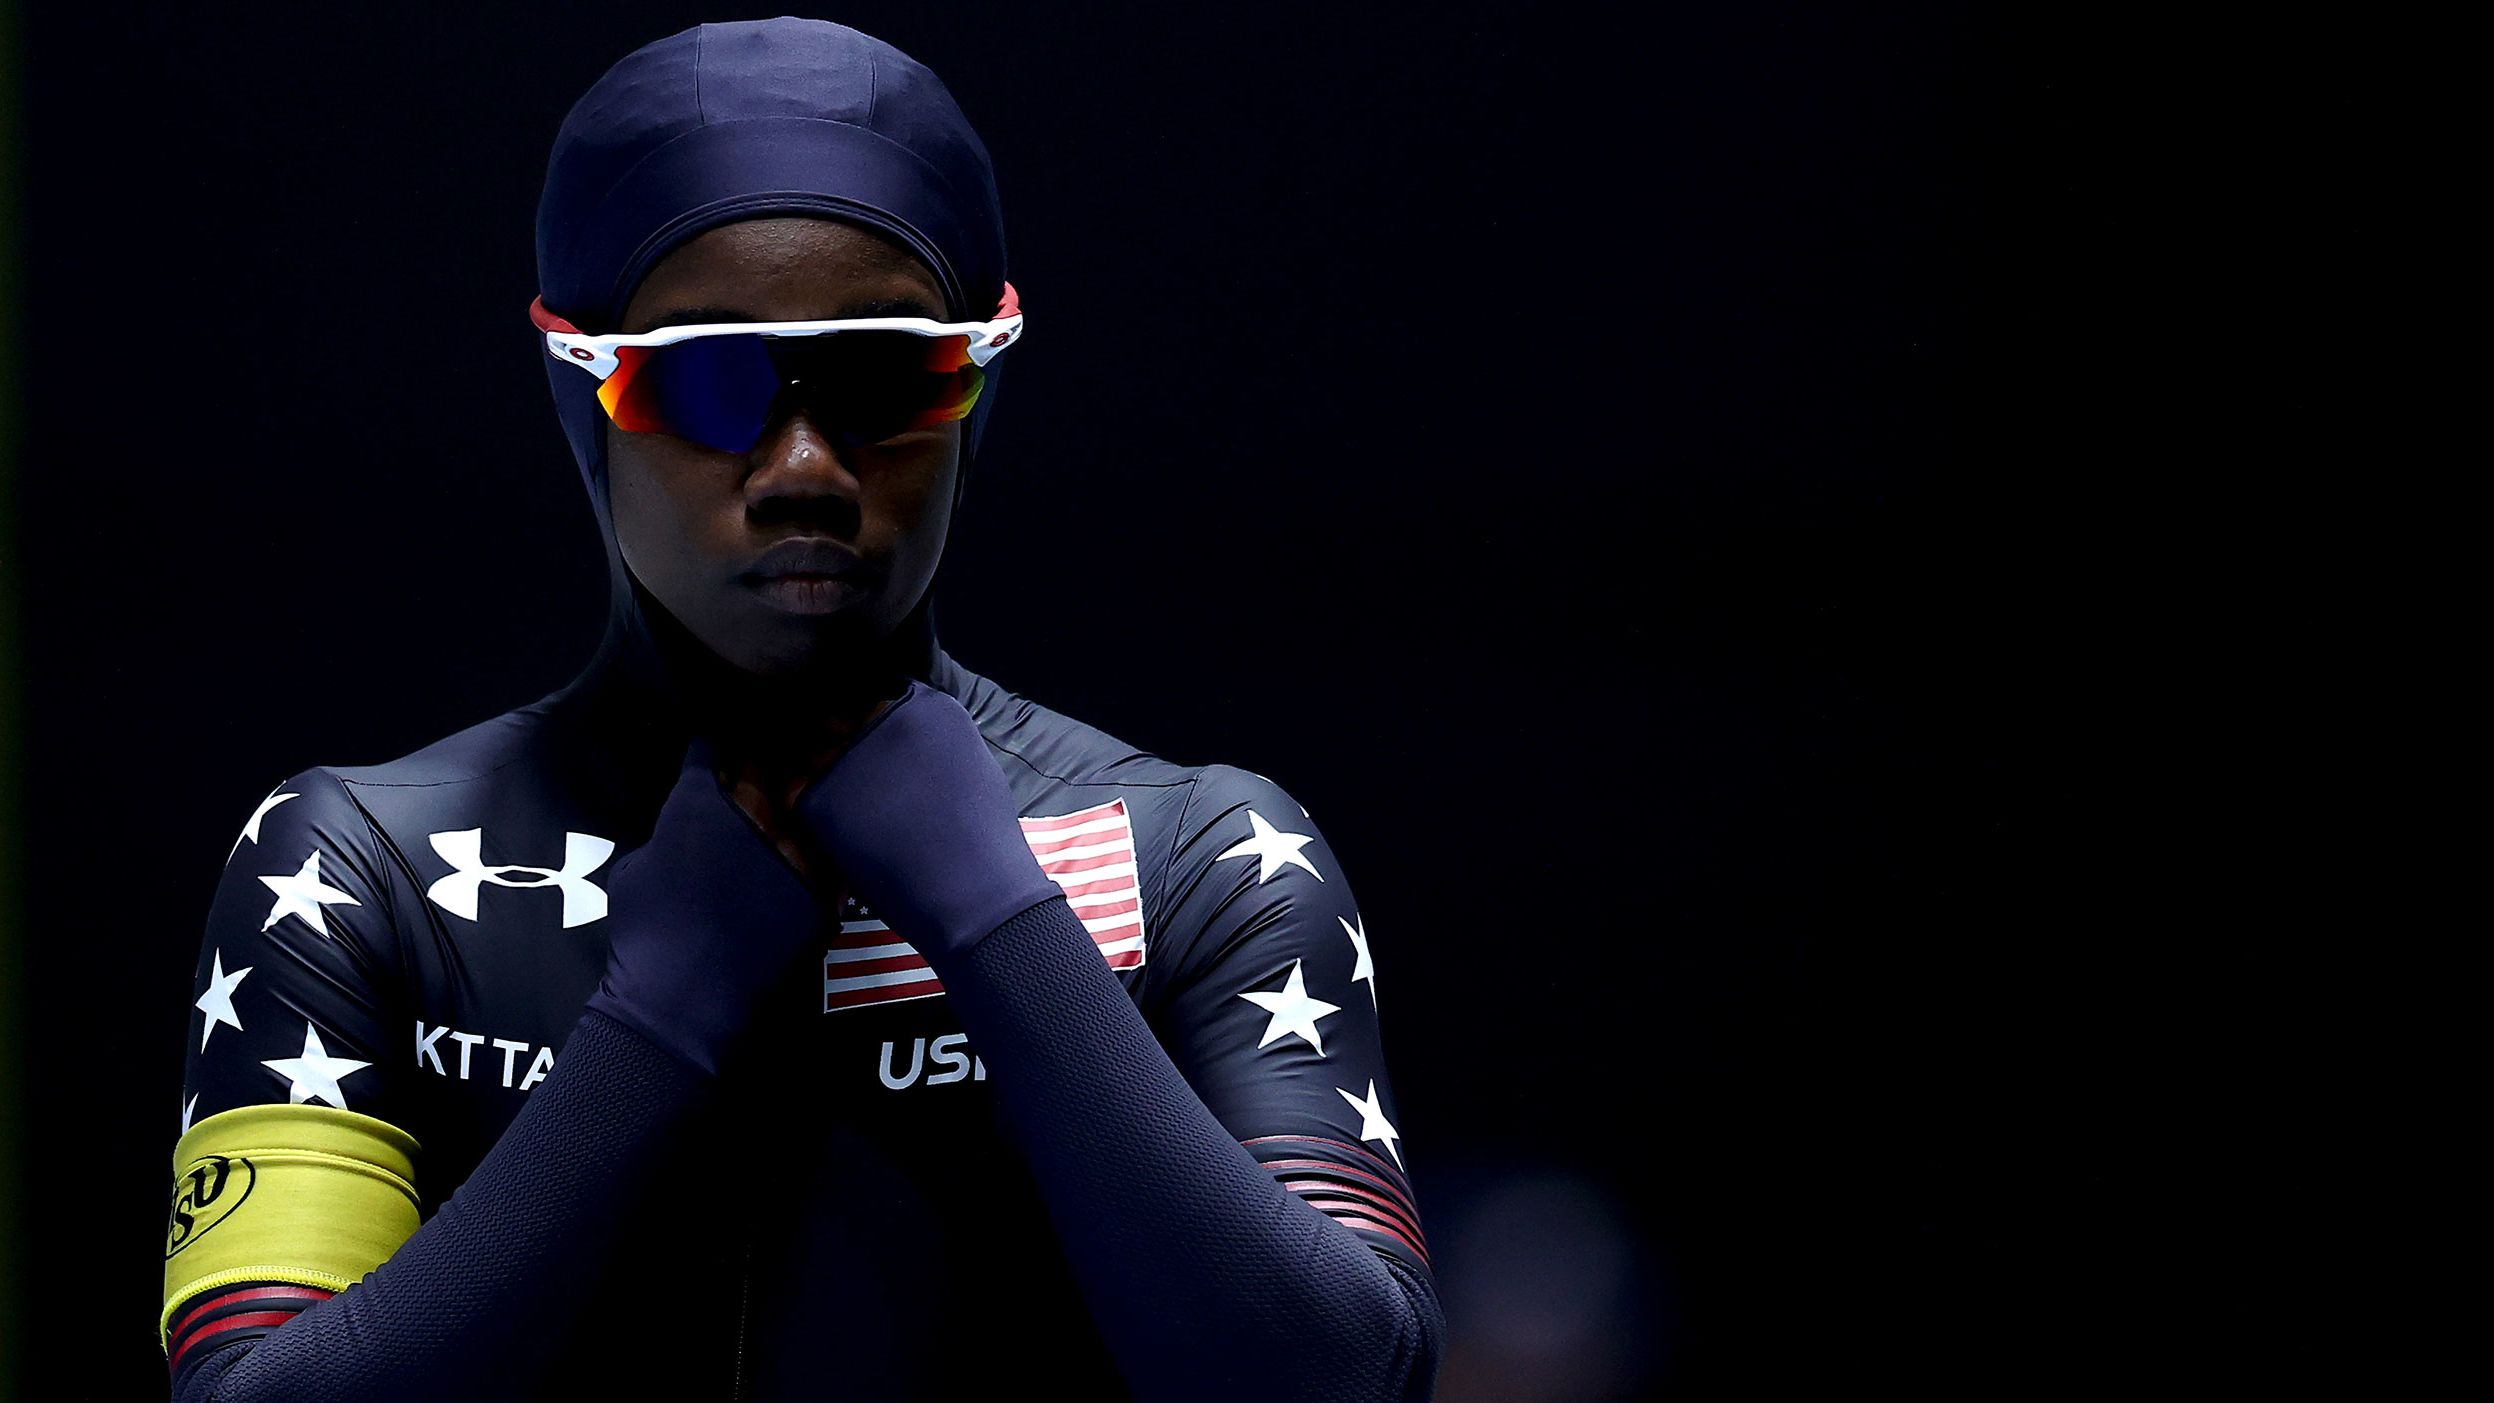 <strong>Erin Jackson (United States):</strong> Jackson, the world's top-ranked speedskater in the 500 meters, stumbled at the US trials and failed to qualify for the Olympics. But the winner of that race, veteran Brittany Bowe, <a href="https://www.cnn.com/2022/01/11/sport/erin-jackson-brittany-bowe-speedskating-intl-spt/index.html" target="_blank">gave her spot to Jackson</a> and said "no one's more deserving." Jackson, 29, said she was "grateful and humbled" by Bowe's kindness. It ended up working out for both skaters in the end; some nations returned their Olympic quota spots, <a href="https://olympics.nbcsports.com/2022/01/24/brittany-bowe-erin-jackson-speed-skating-olympics/" target="_blank" target="_blank">opening up an extra spot</a> that would allow both Jackson and Bowe to compete. Bowe, 33, already was set to race in the 1,000 and 1,500 meters.